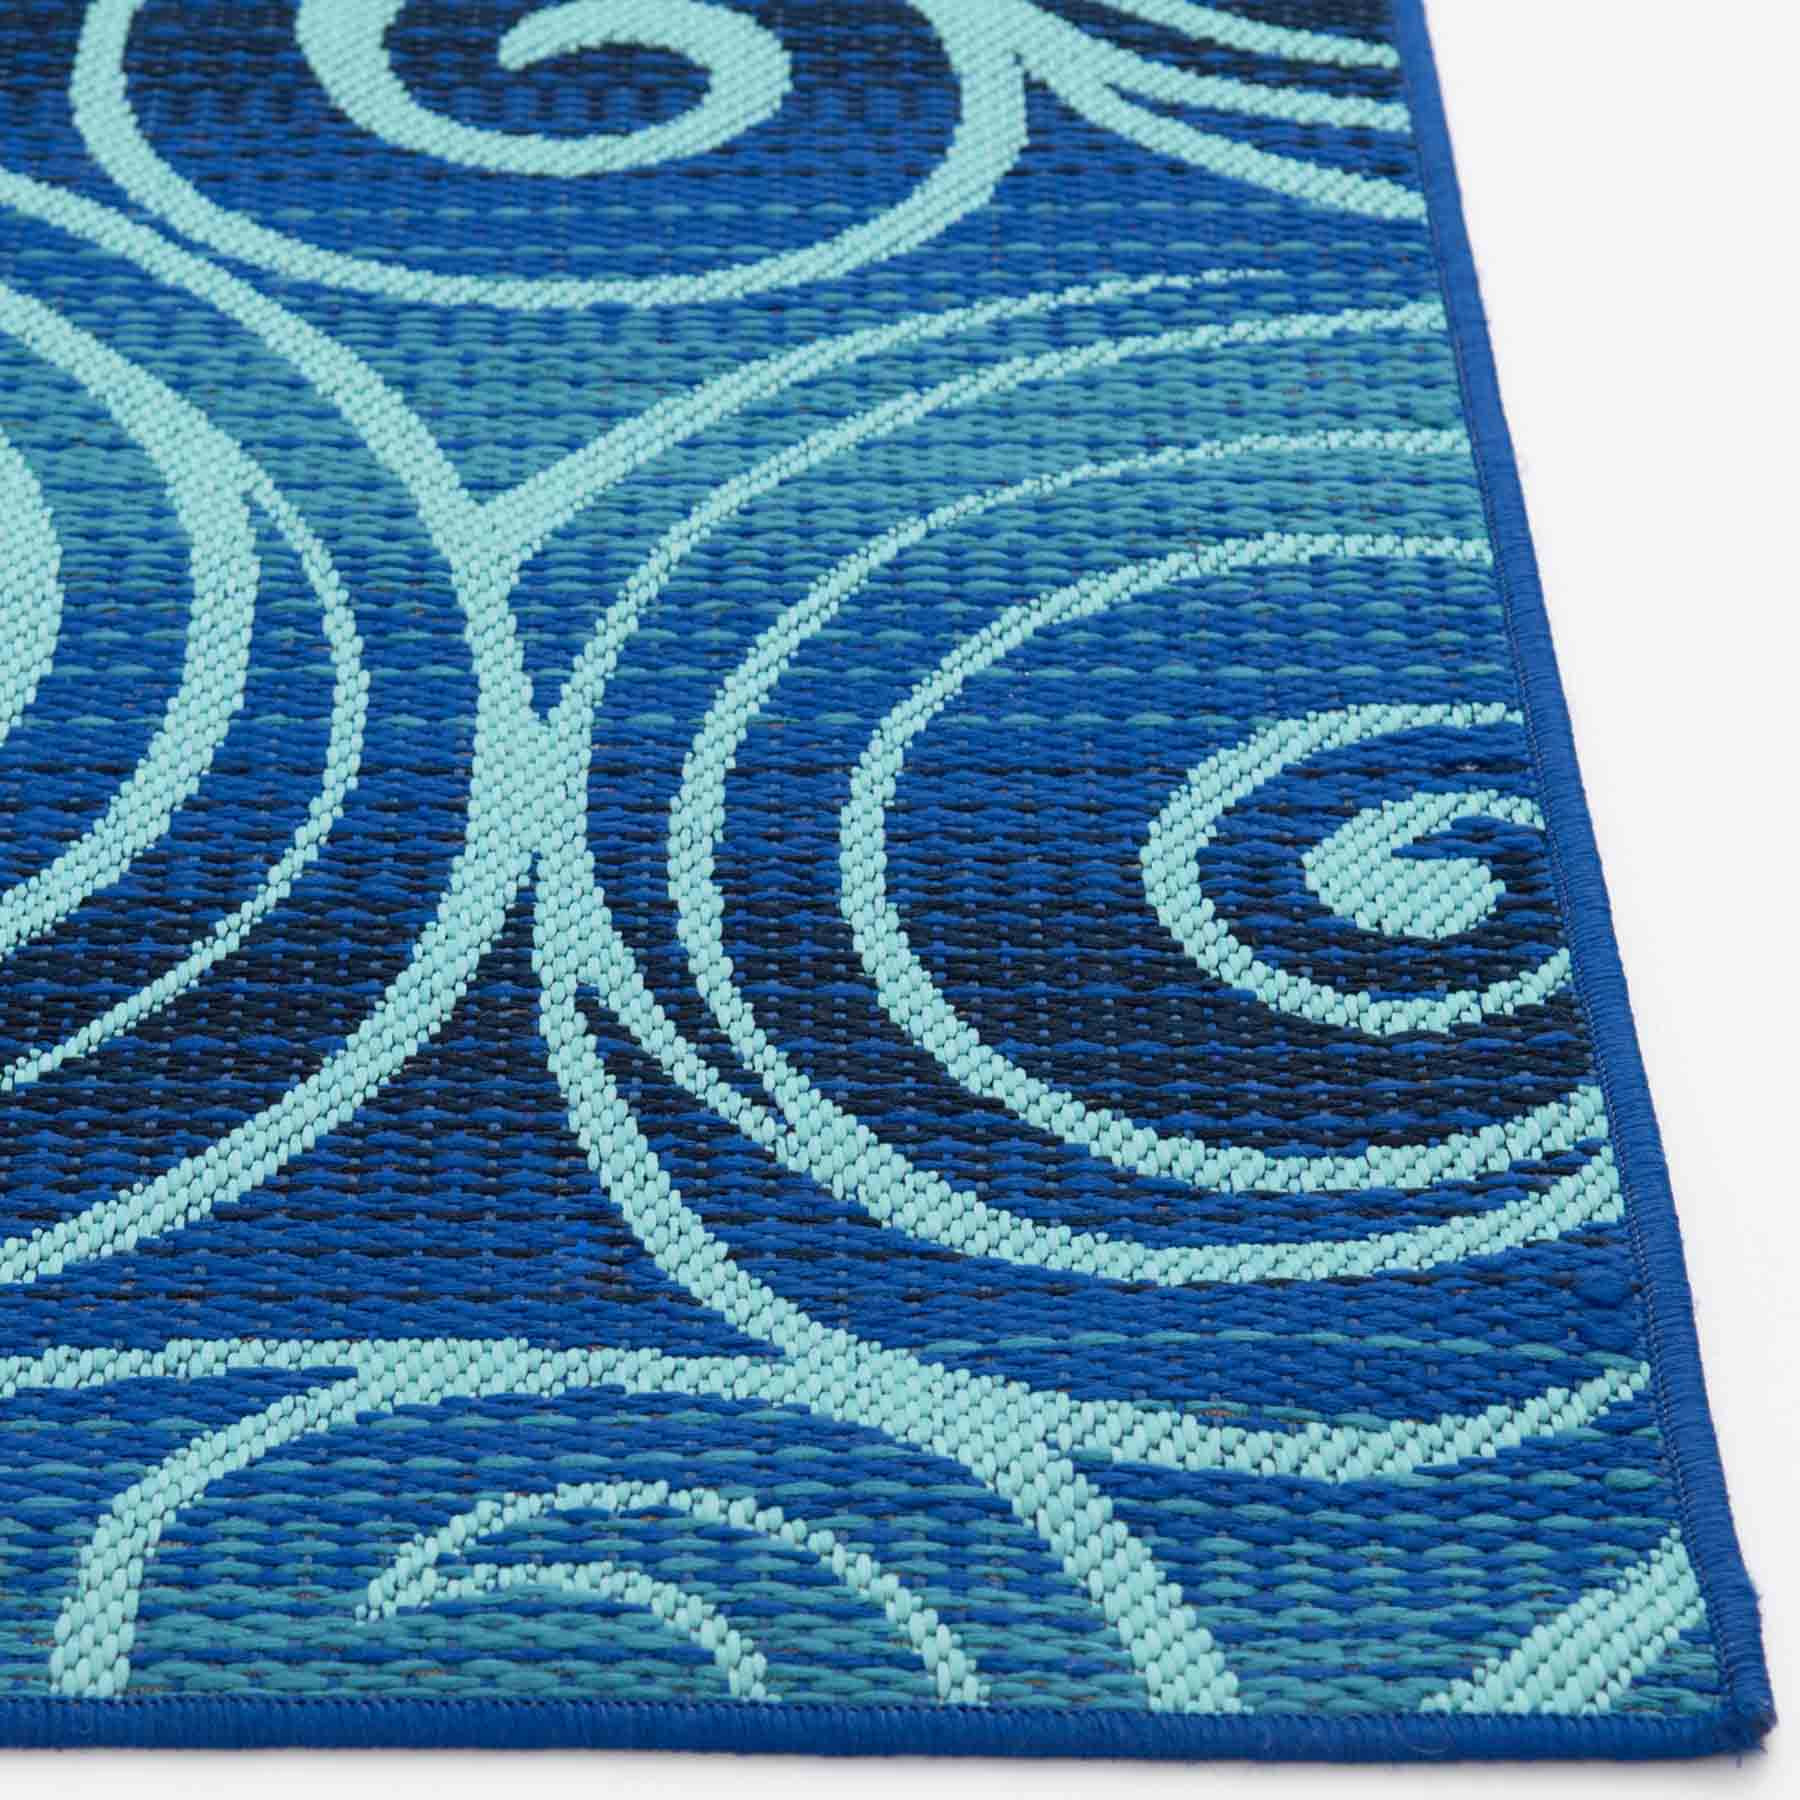 (E442) Scope Blue Wave Outdoor Area Rug, 8x10 - nybusiness